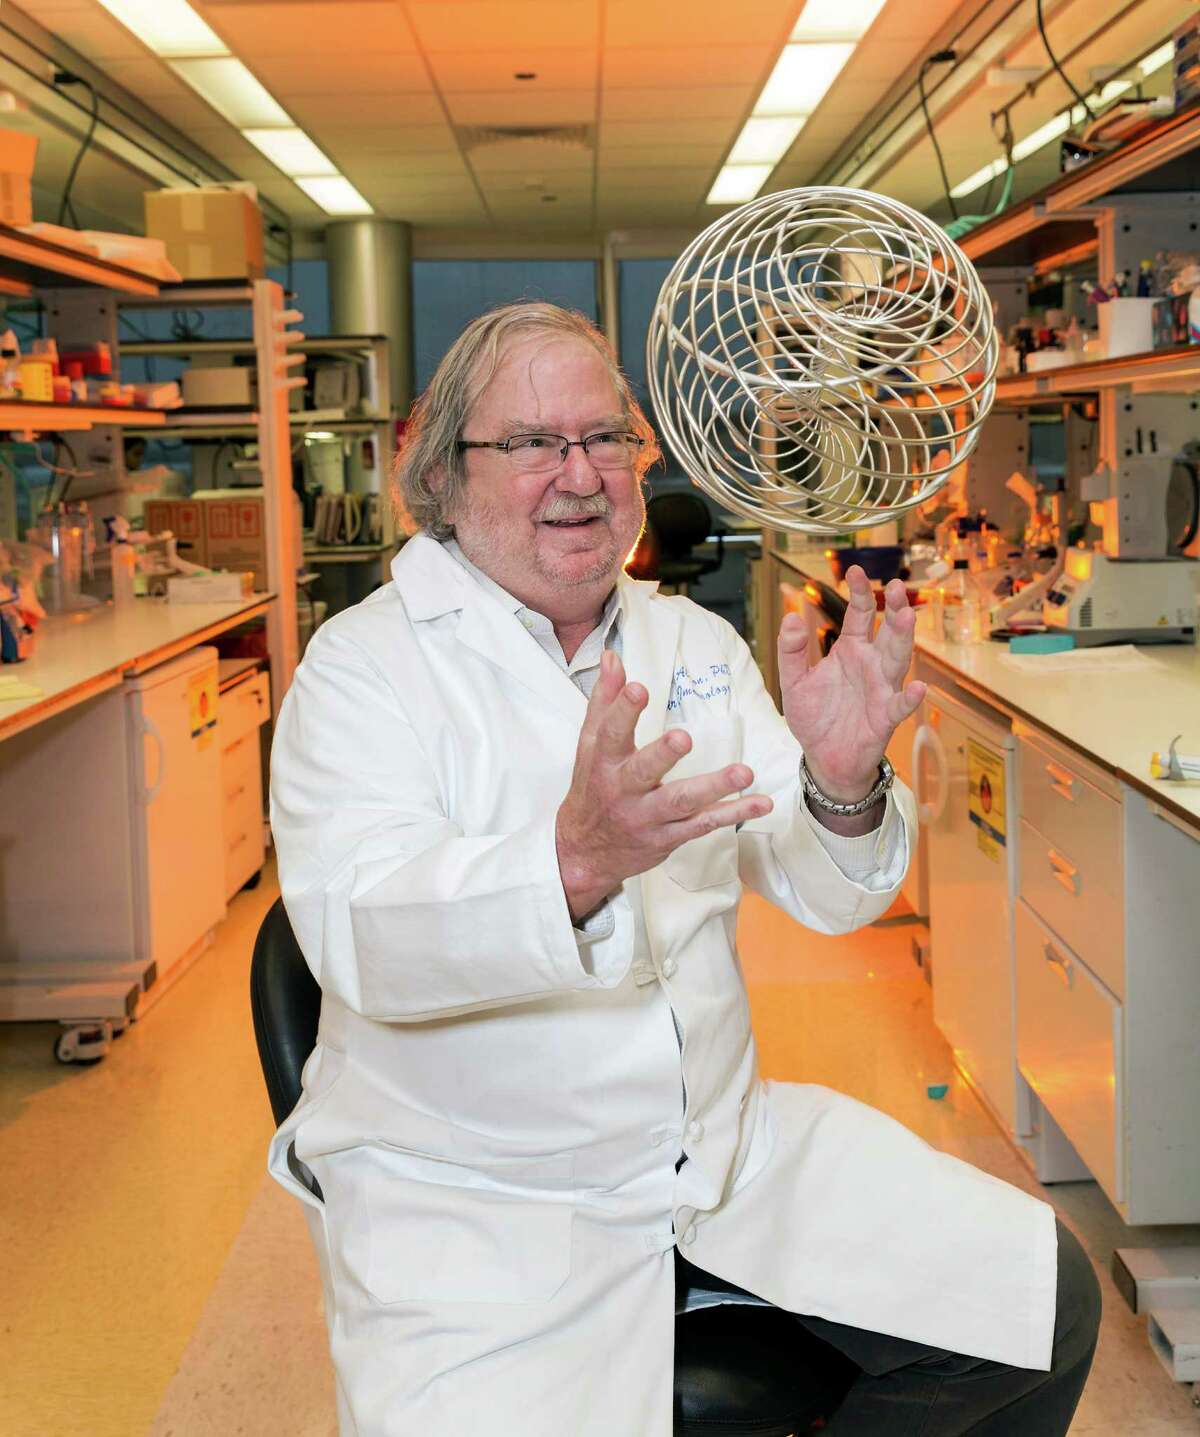 M.D. Anderson researcher Jim Allison's work on cancer immunotherapy earned him the 2014 Breakthrough Prize in Life Sciences, and $3 million.